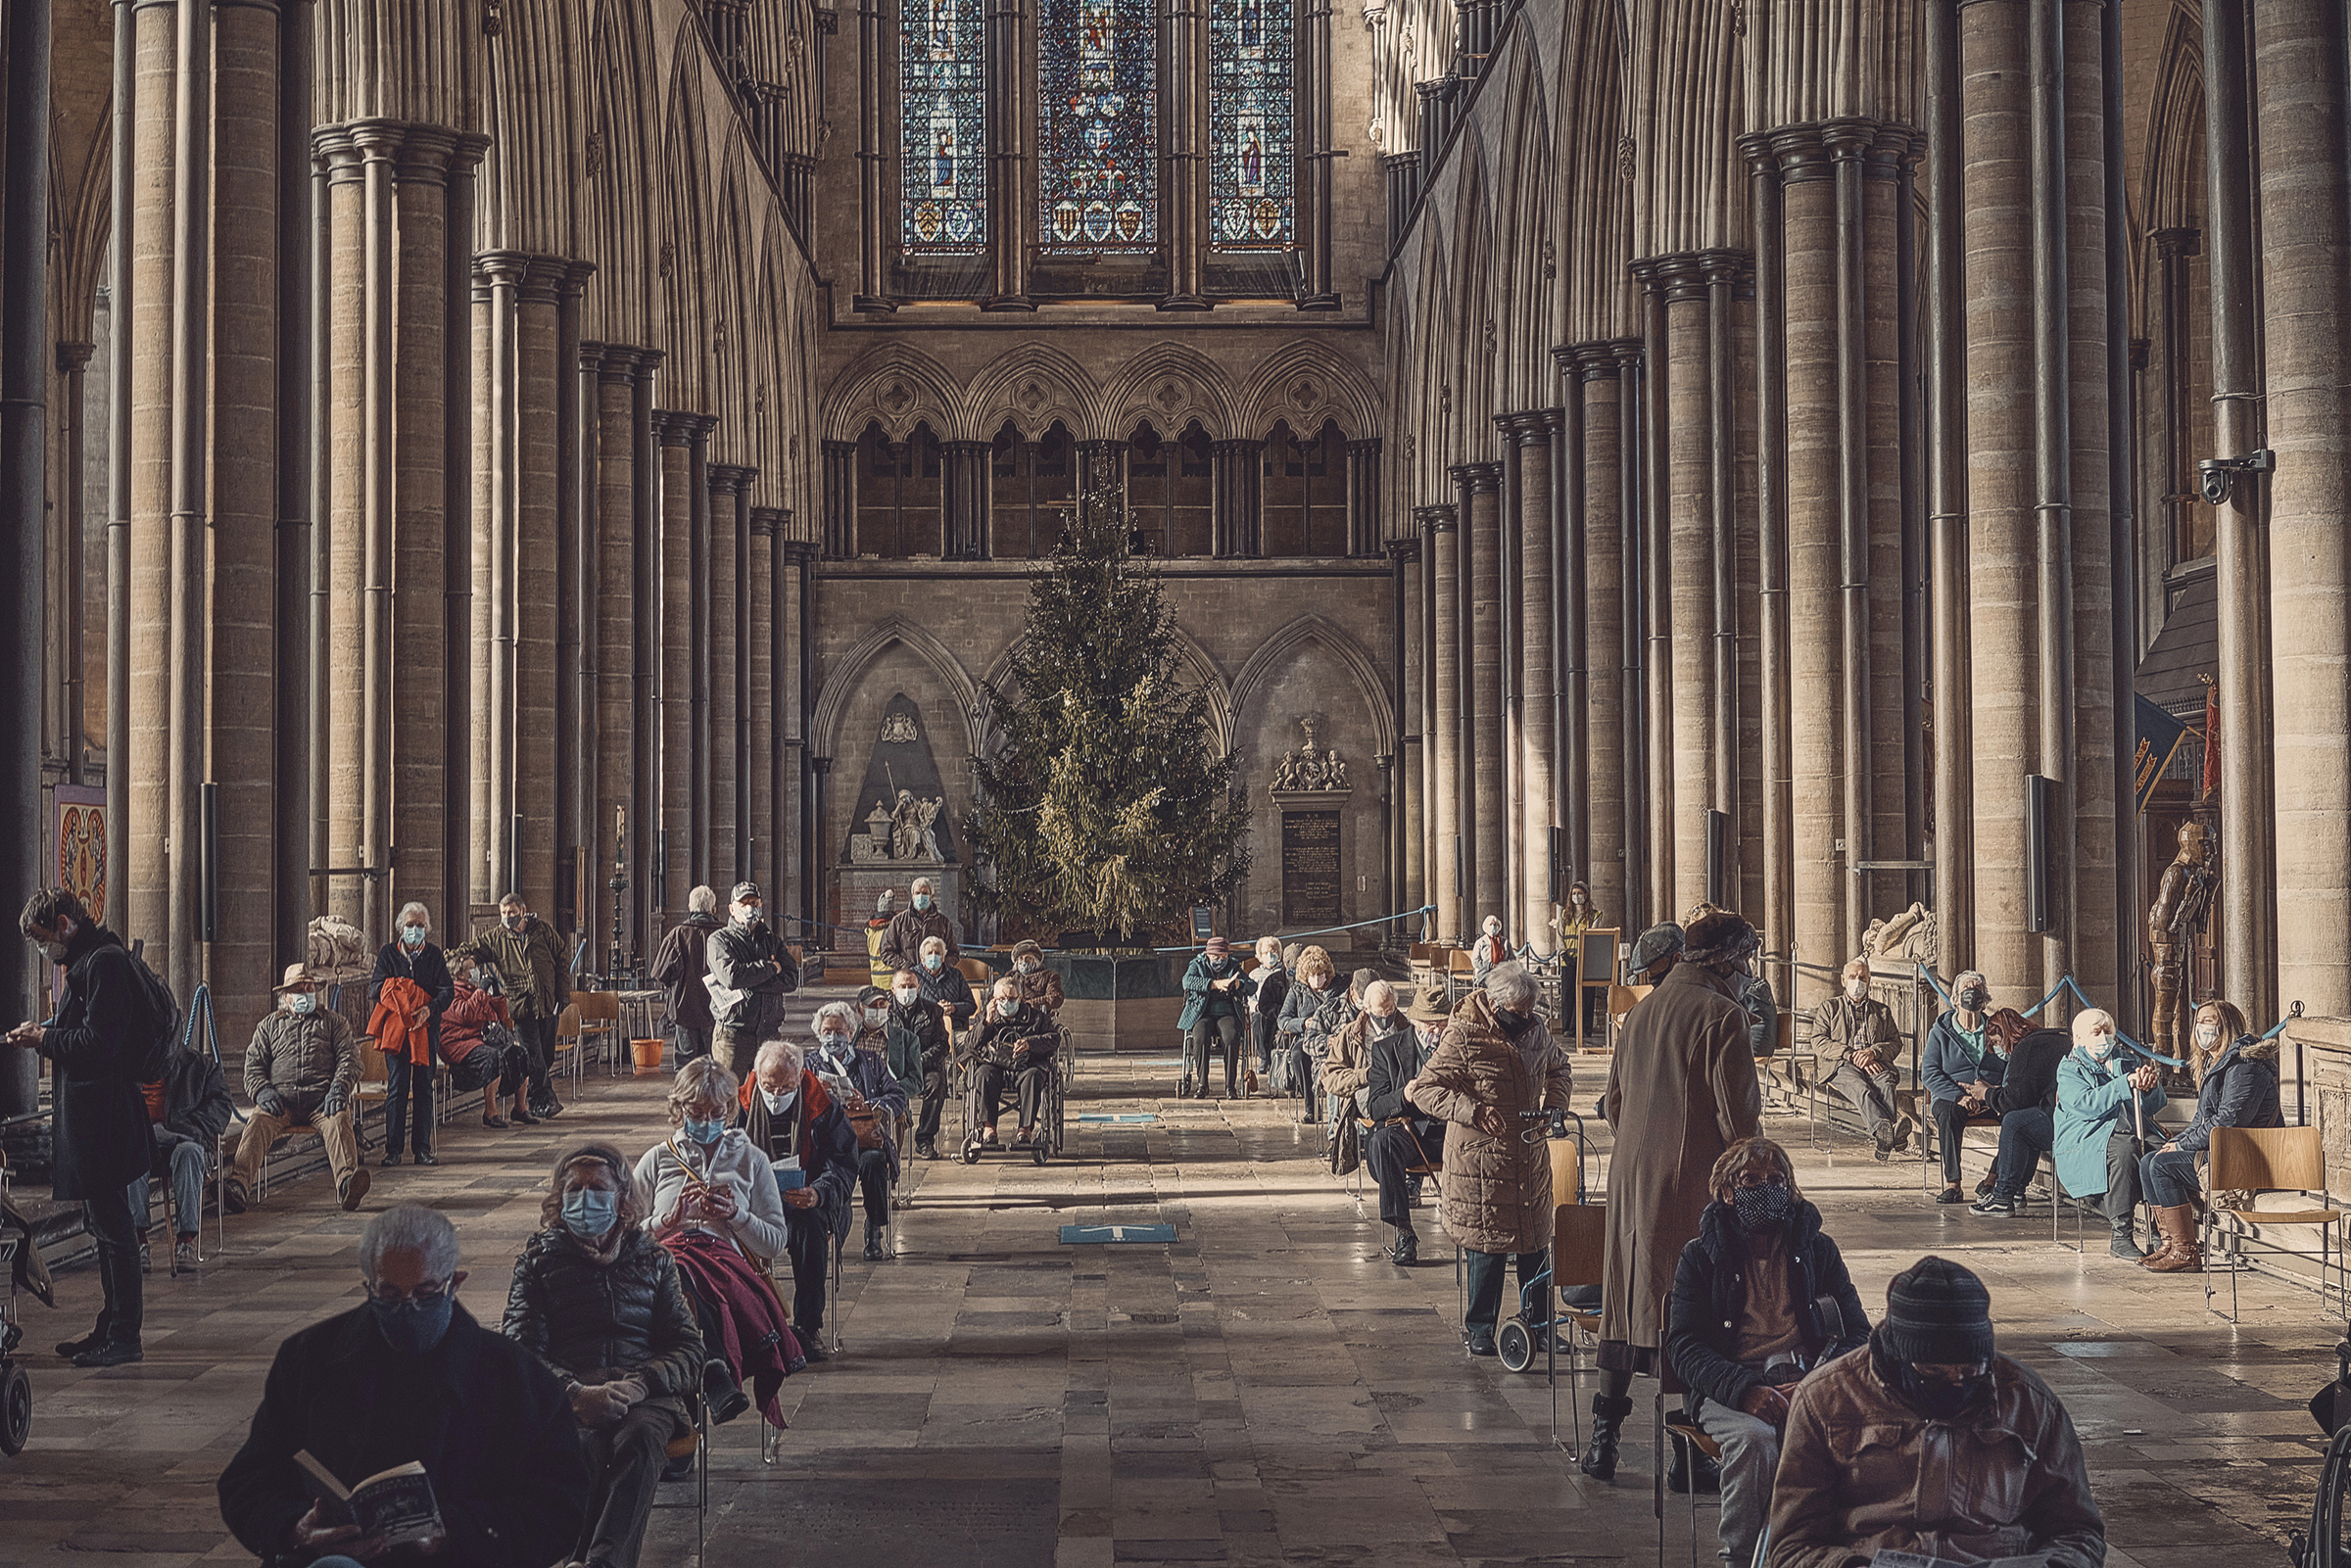 Salisbury Cathedral functions as a COVID-19 vaccination site in Salisbury, England, on Jan. 23, 2021. (Tom Jamieson—The New York Times/Redux)